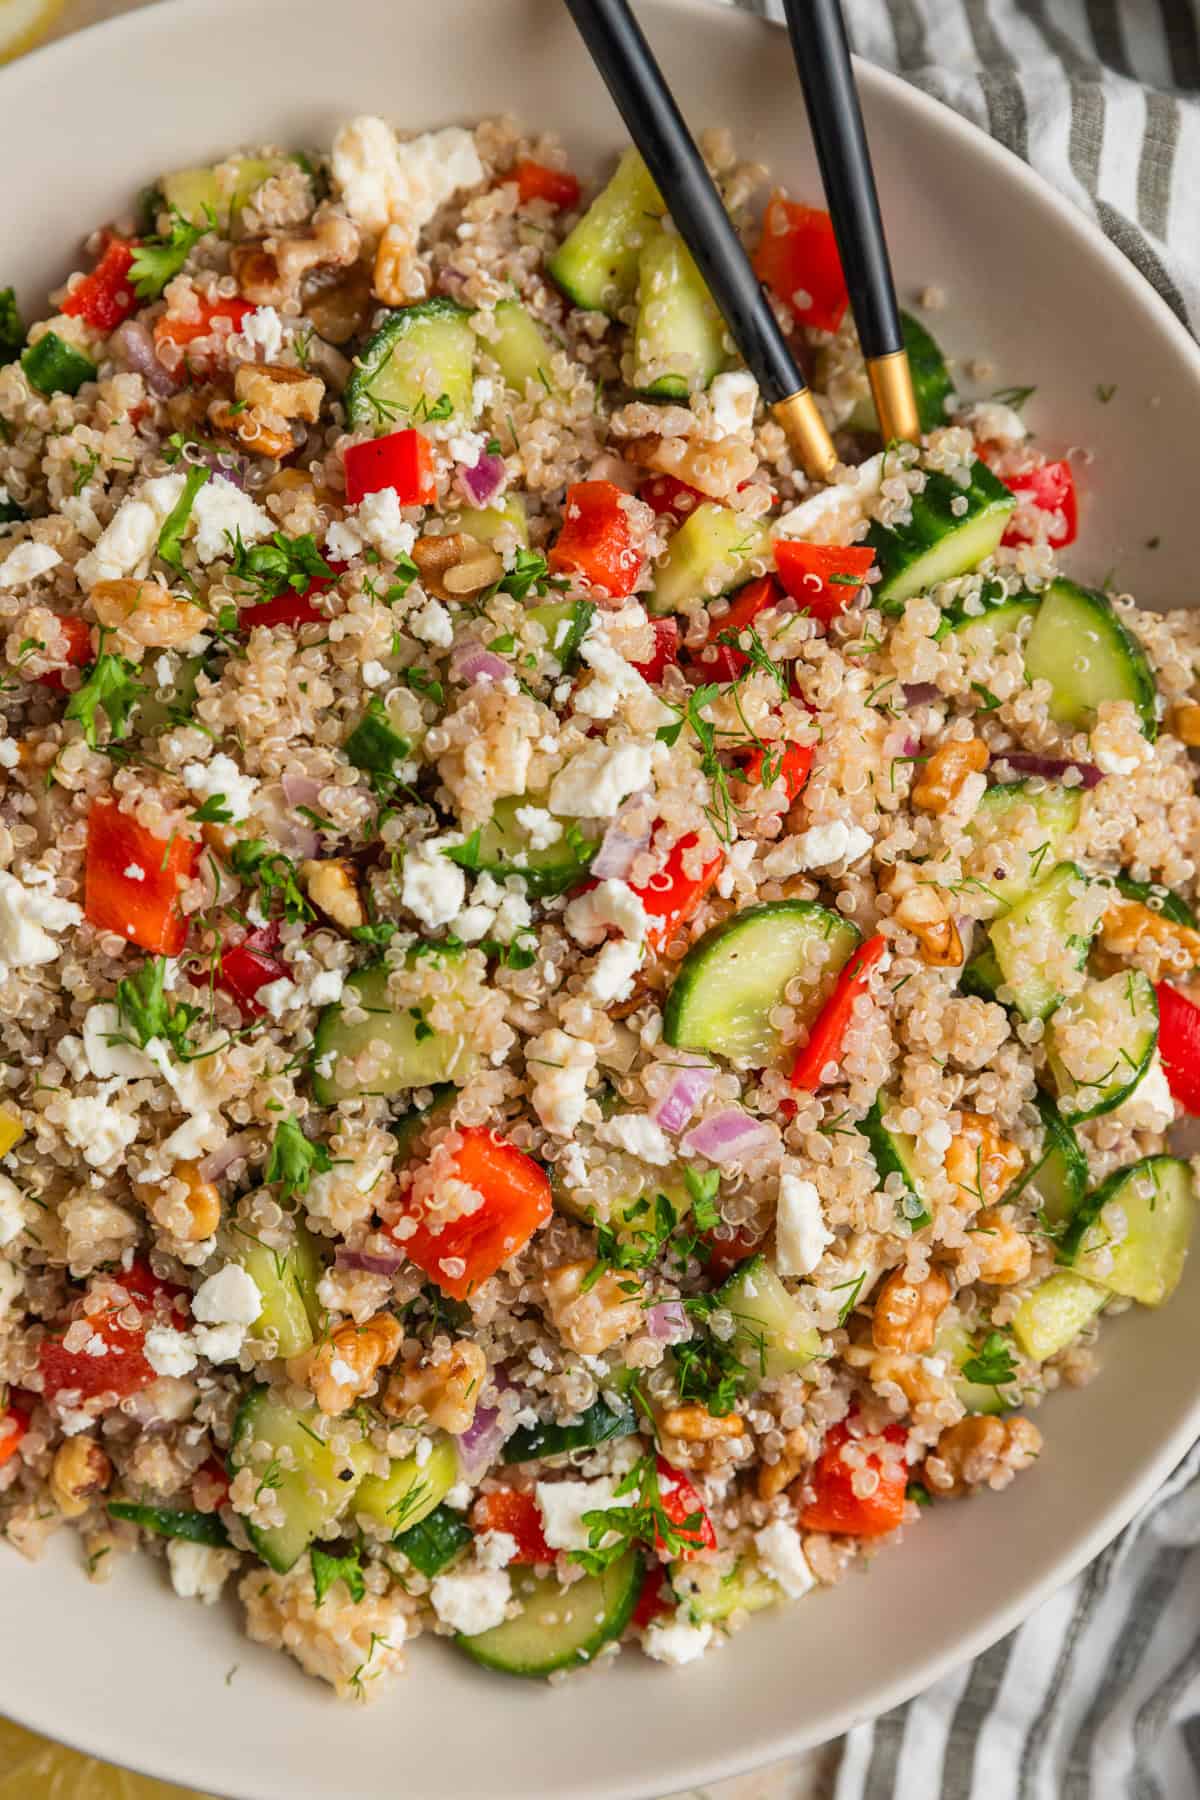 Large bowl with quinoa salad with cucumbers, feta cheese, red pepper, onion, and other ingredients.